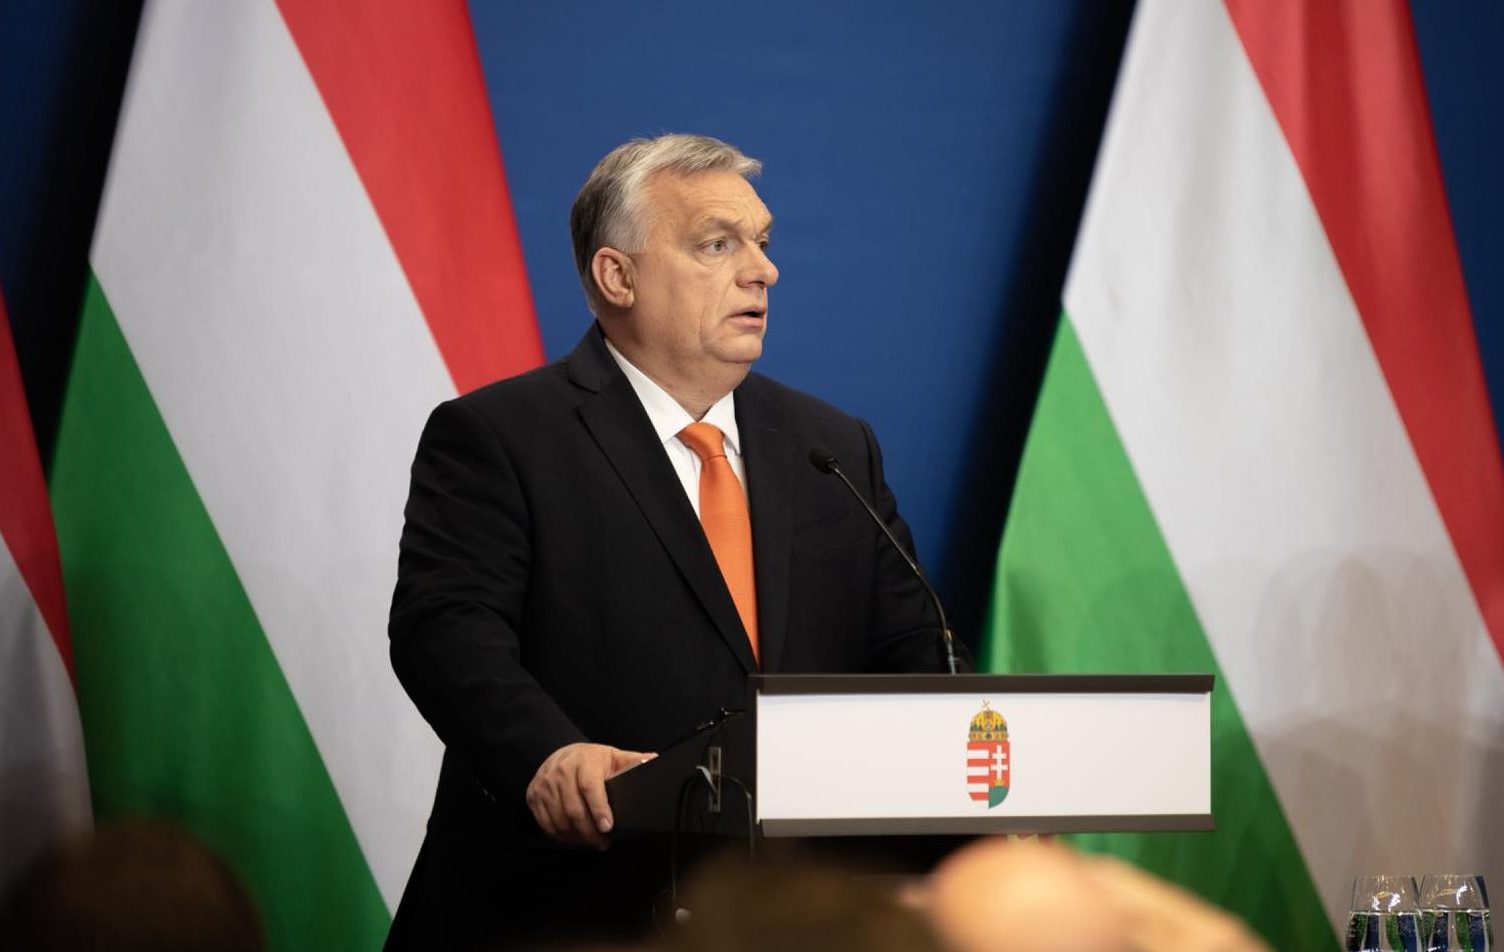 Threat of World War No Exaggeration, Says PM Orbán